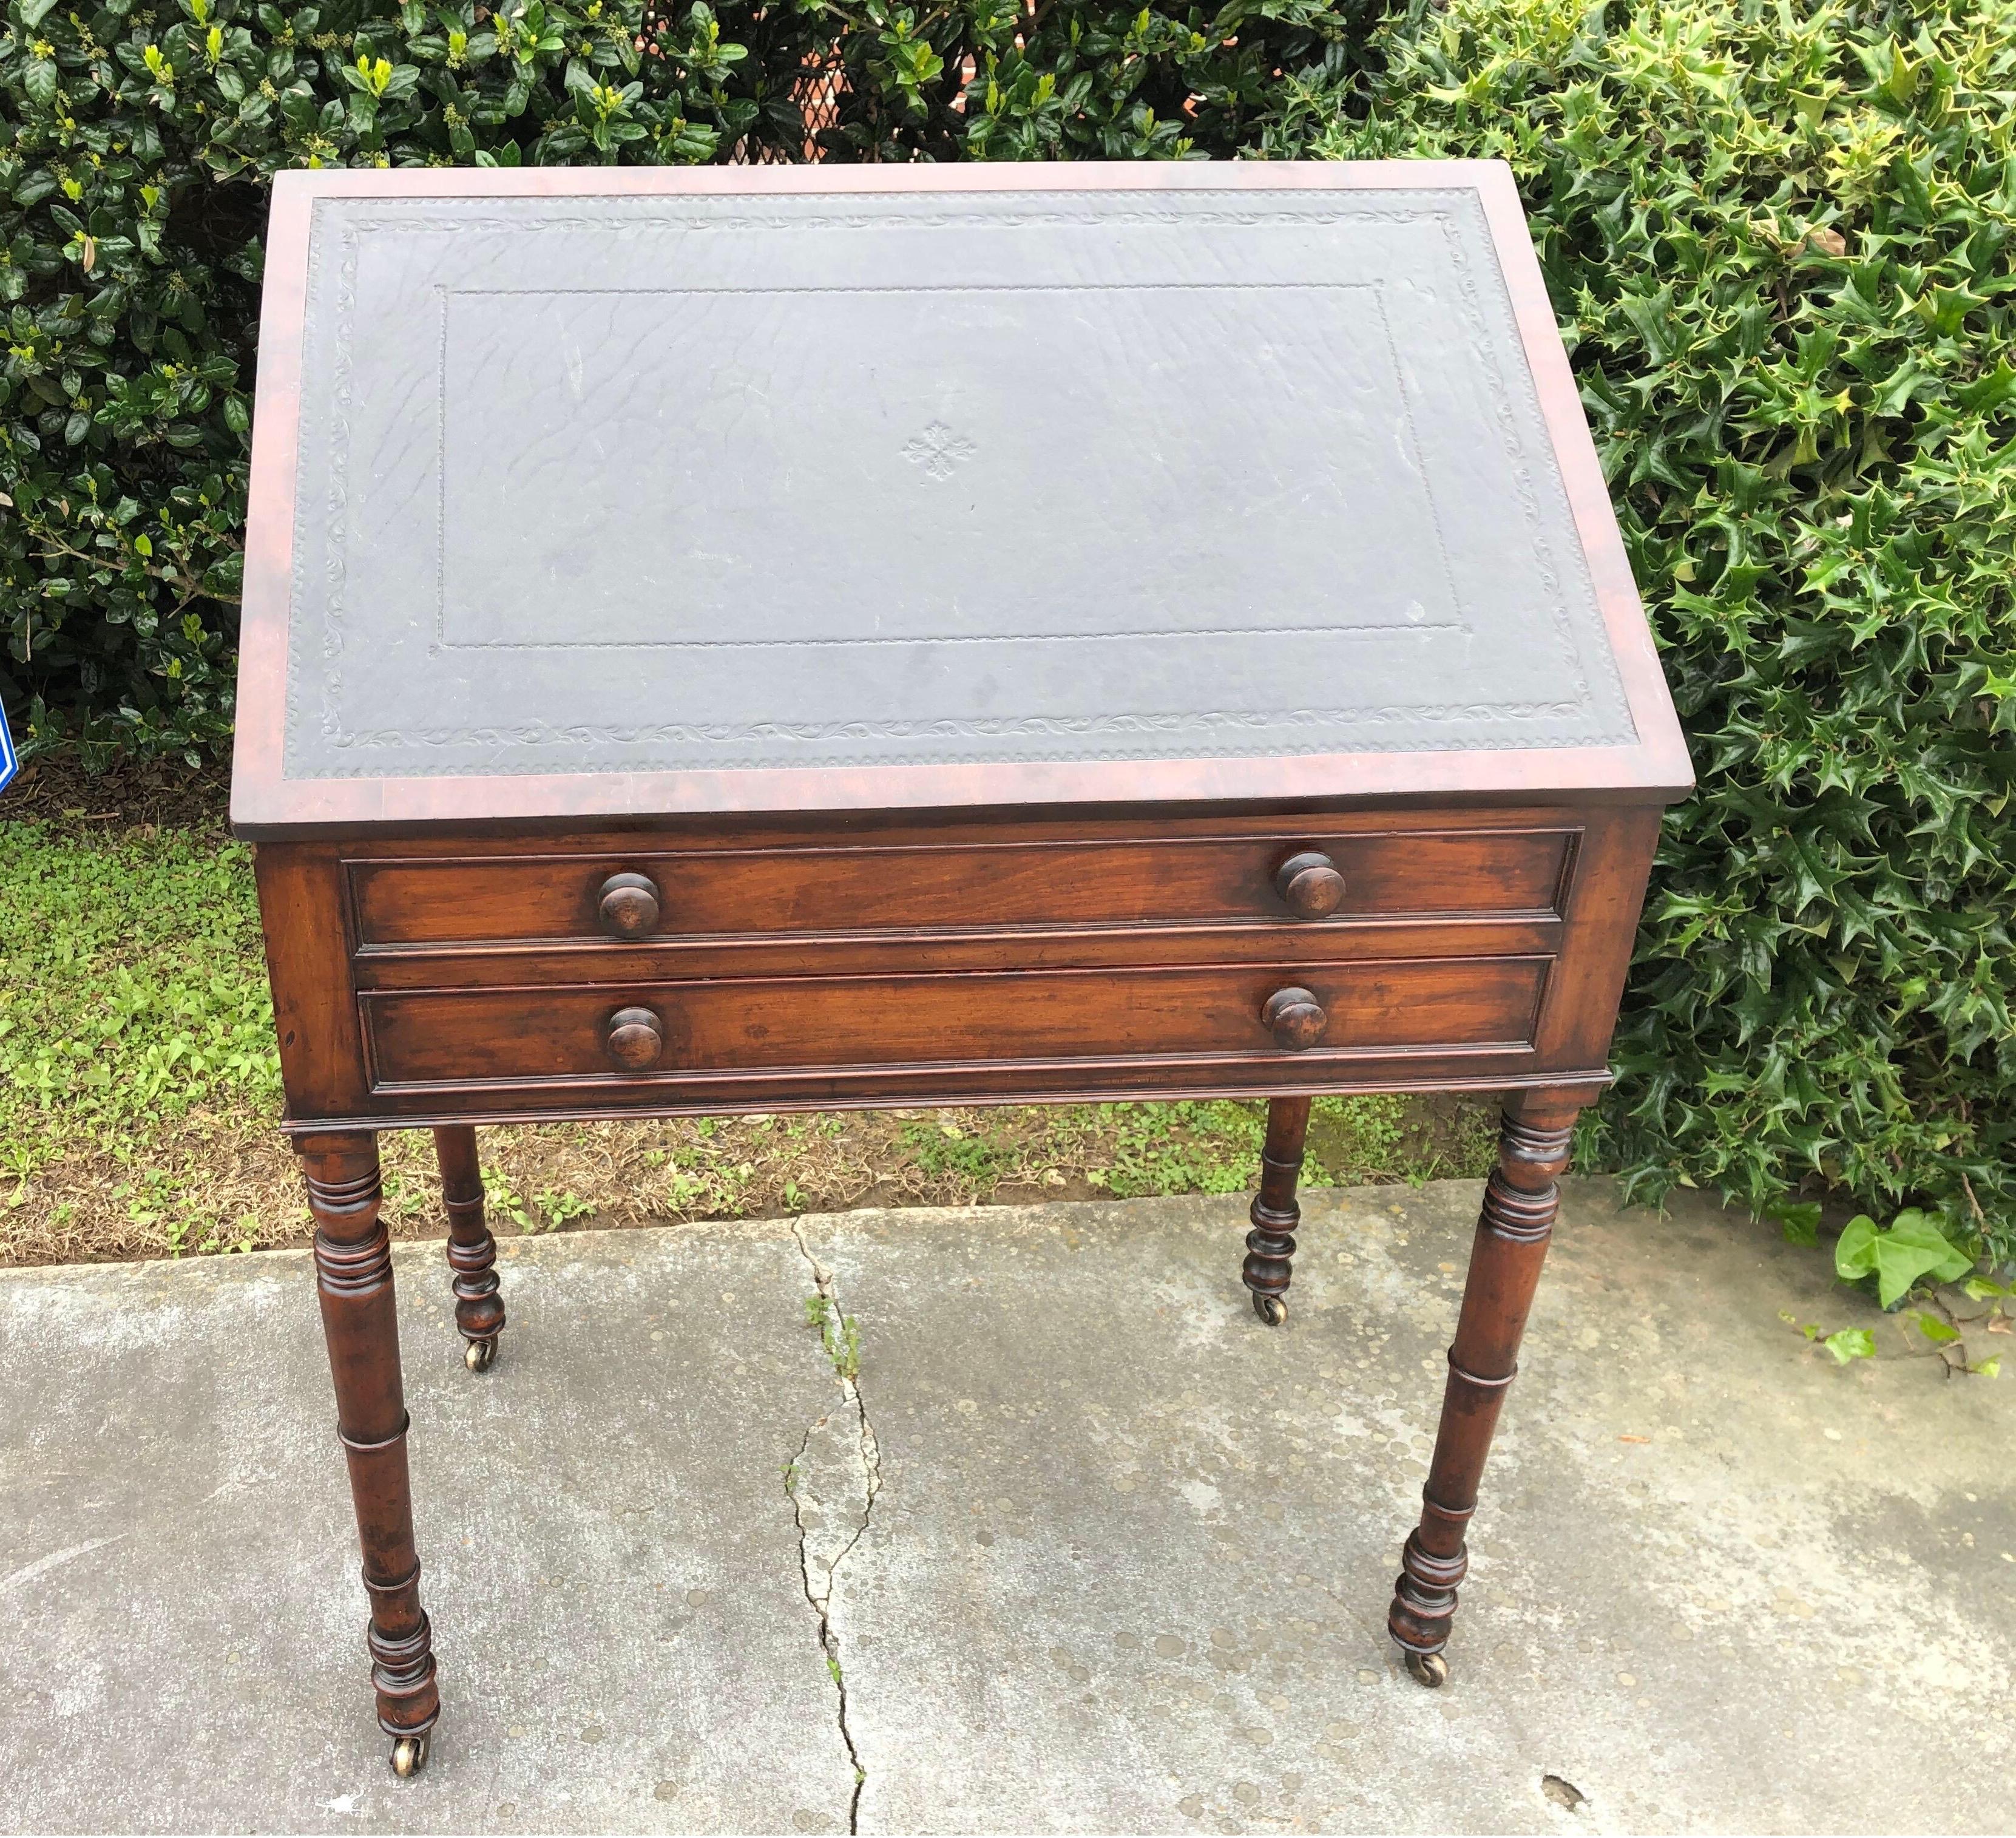 19th century English mahogany and leather top architect's style desk with
inset tooled leather lift top, adjustable easel support, one-drawer under fixed drawer, ring-turned legs and casters.